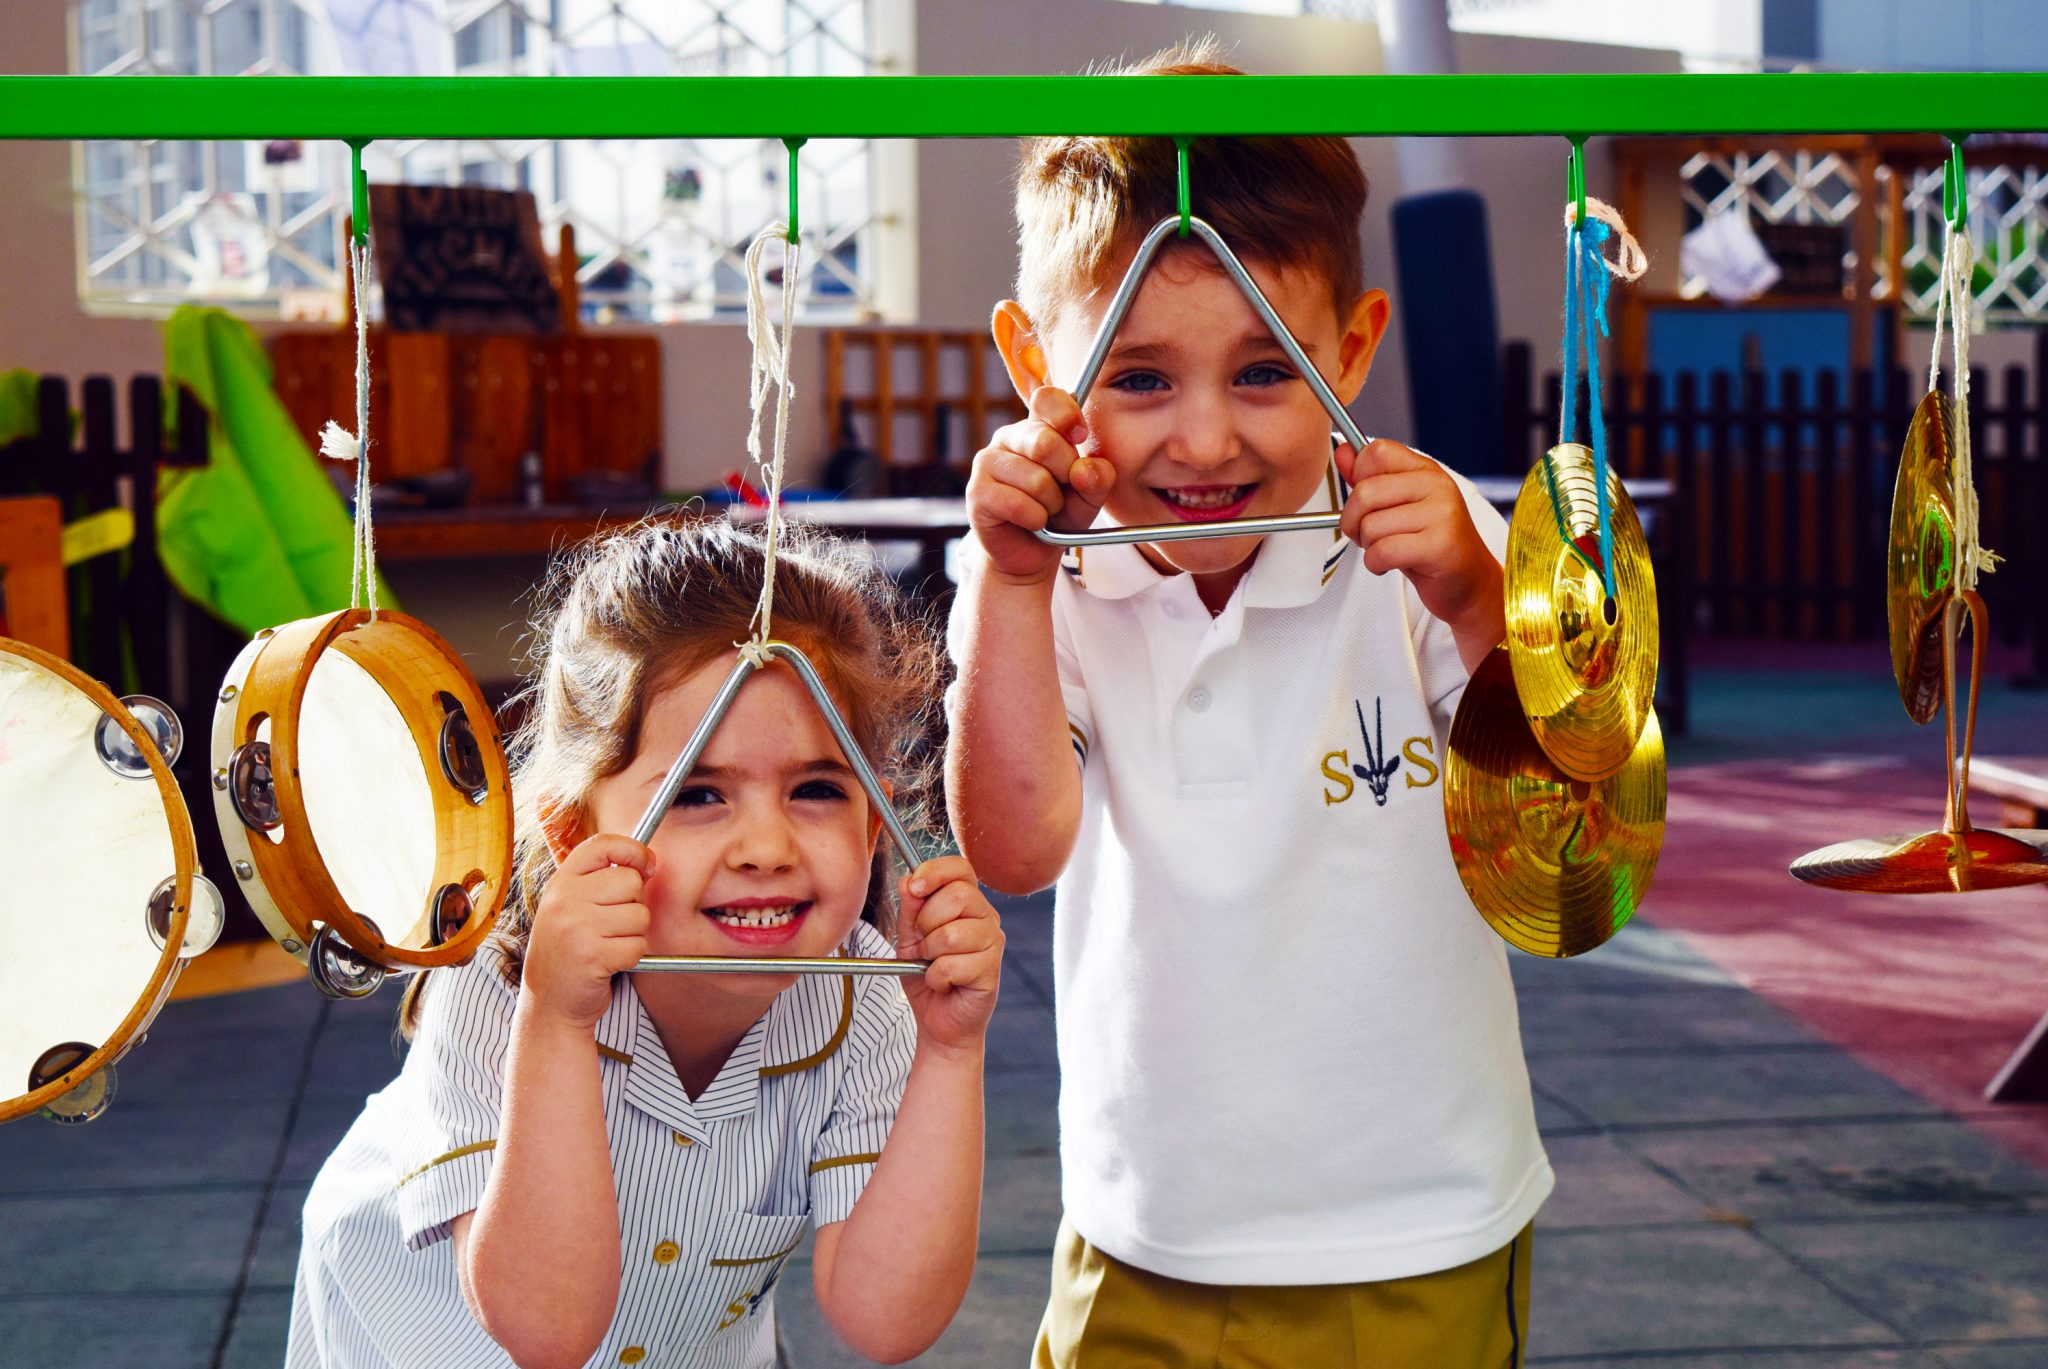 Children at South View School in Dubai learning through play in EYFS